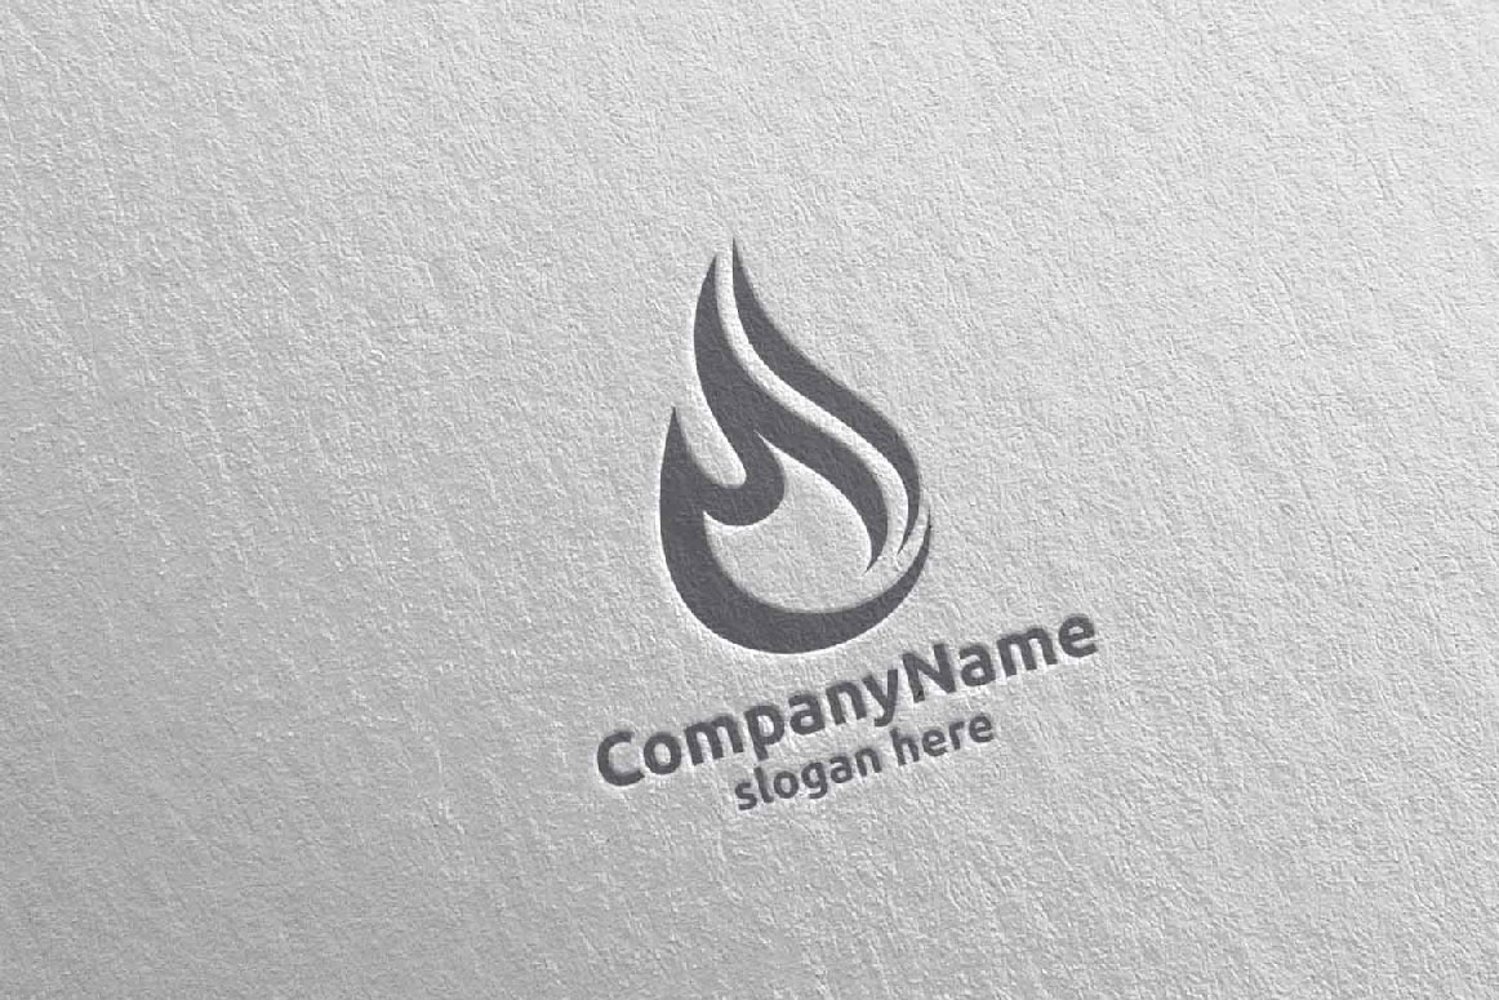 Professionally designed logo in b&w color style.